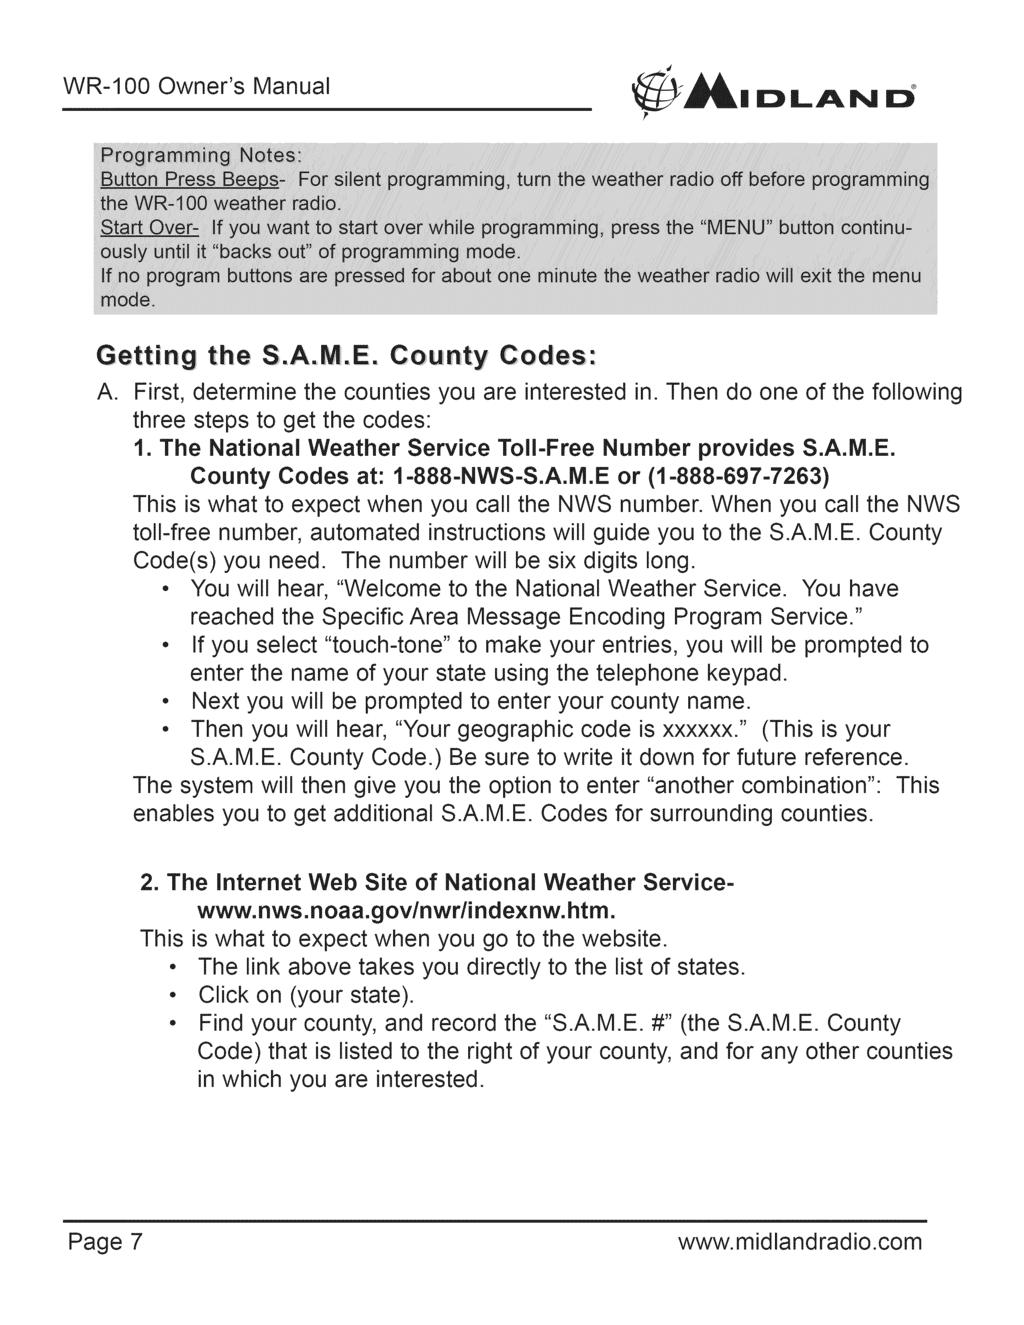 i Gettiing the S.A.M.E. County Codes:: A. First, determine the counties you are interested in. Then do one of the following three steps to get the codes: 1.